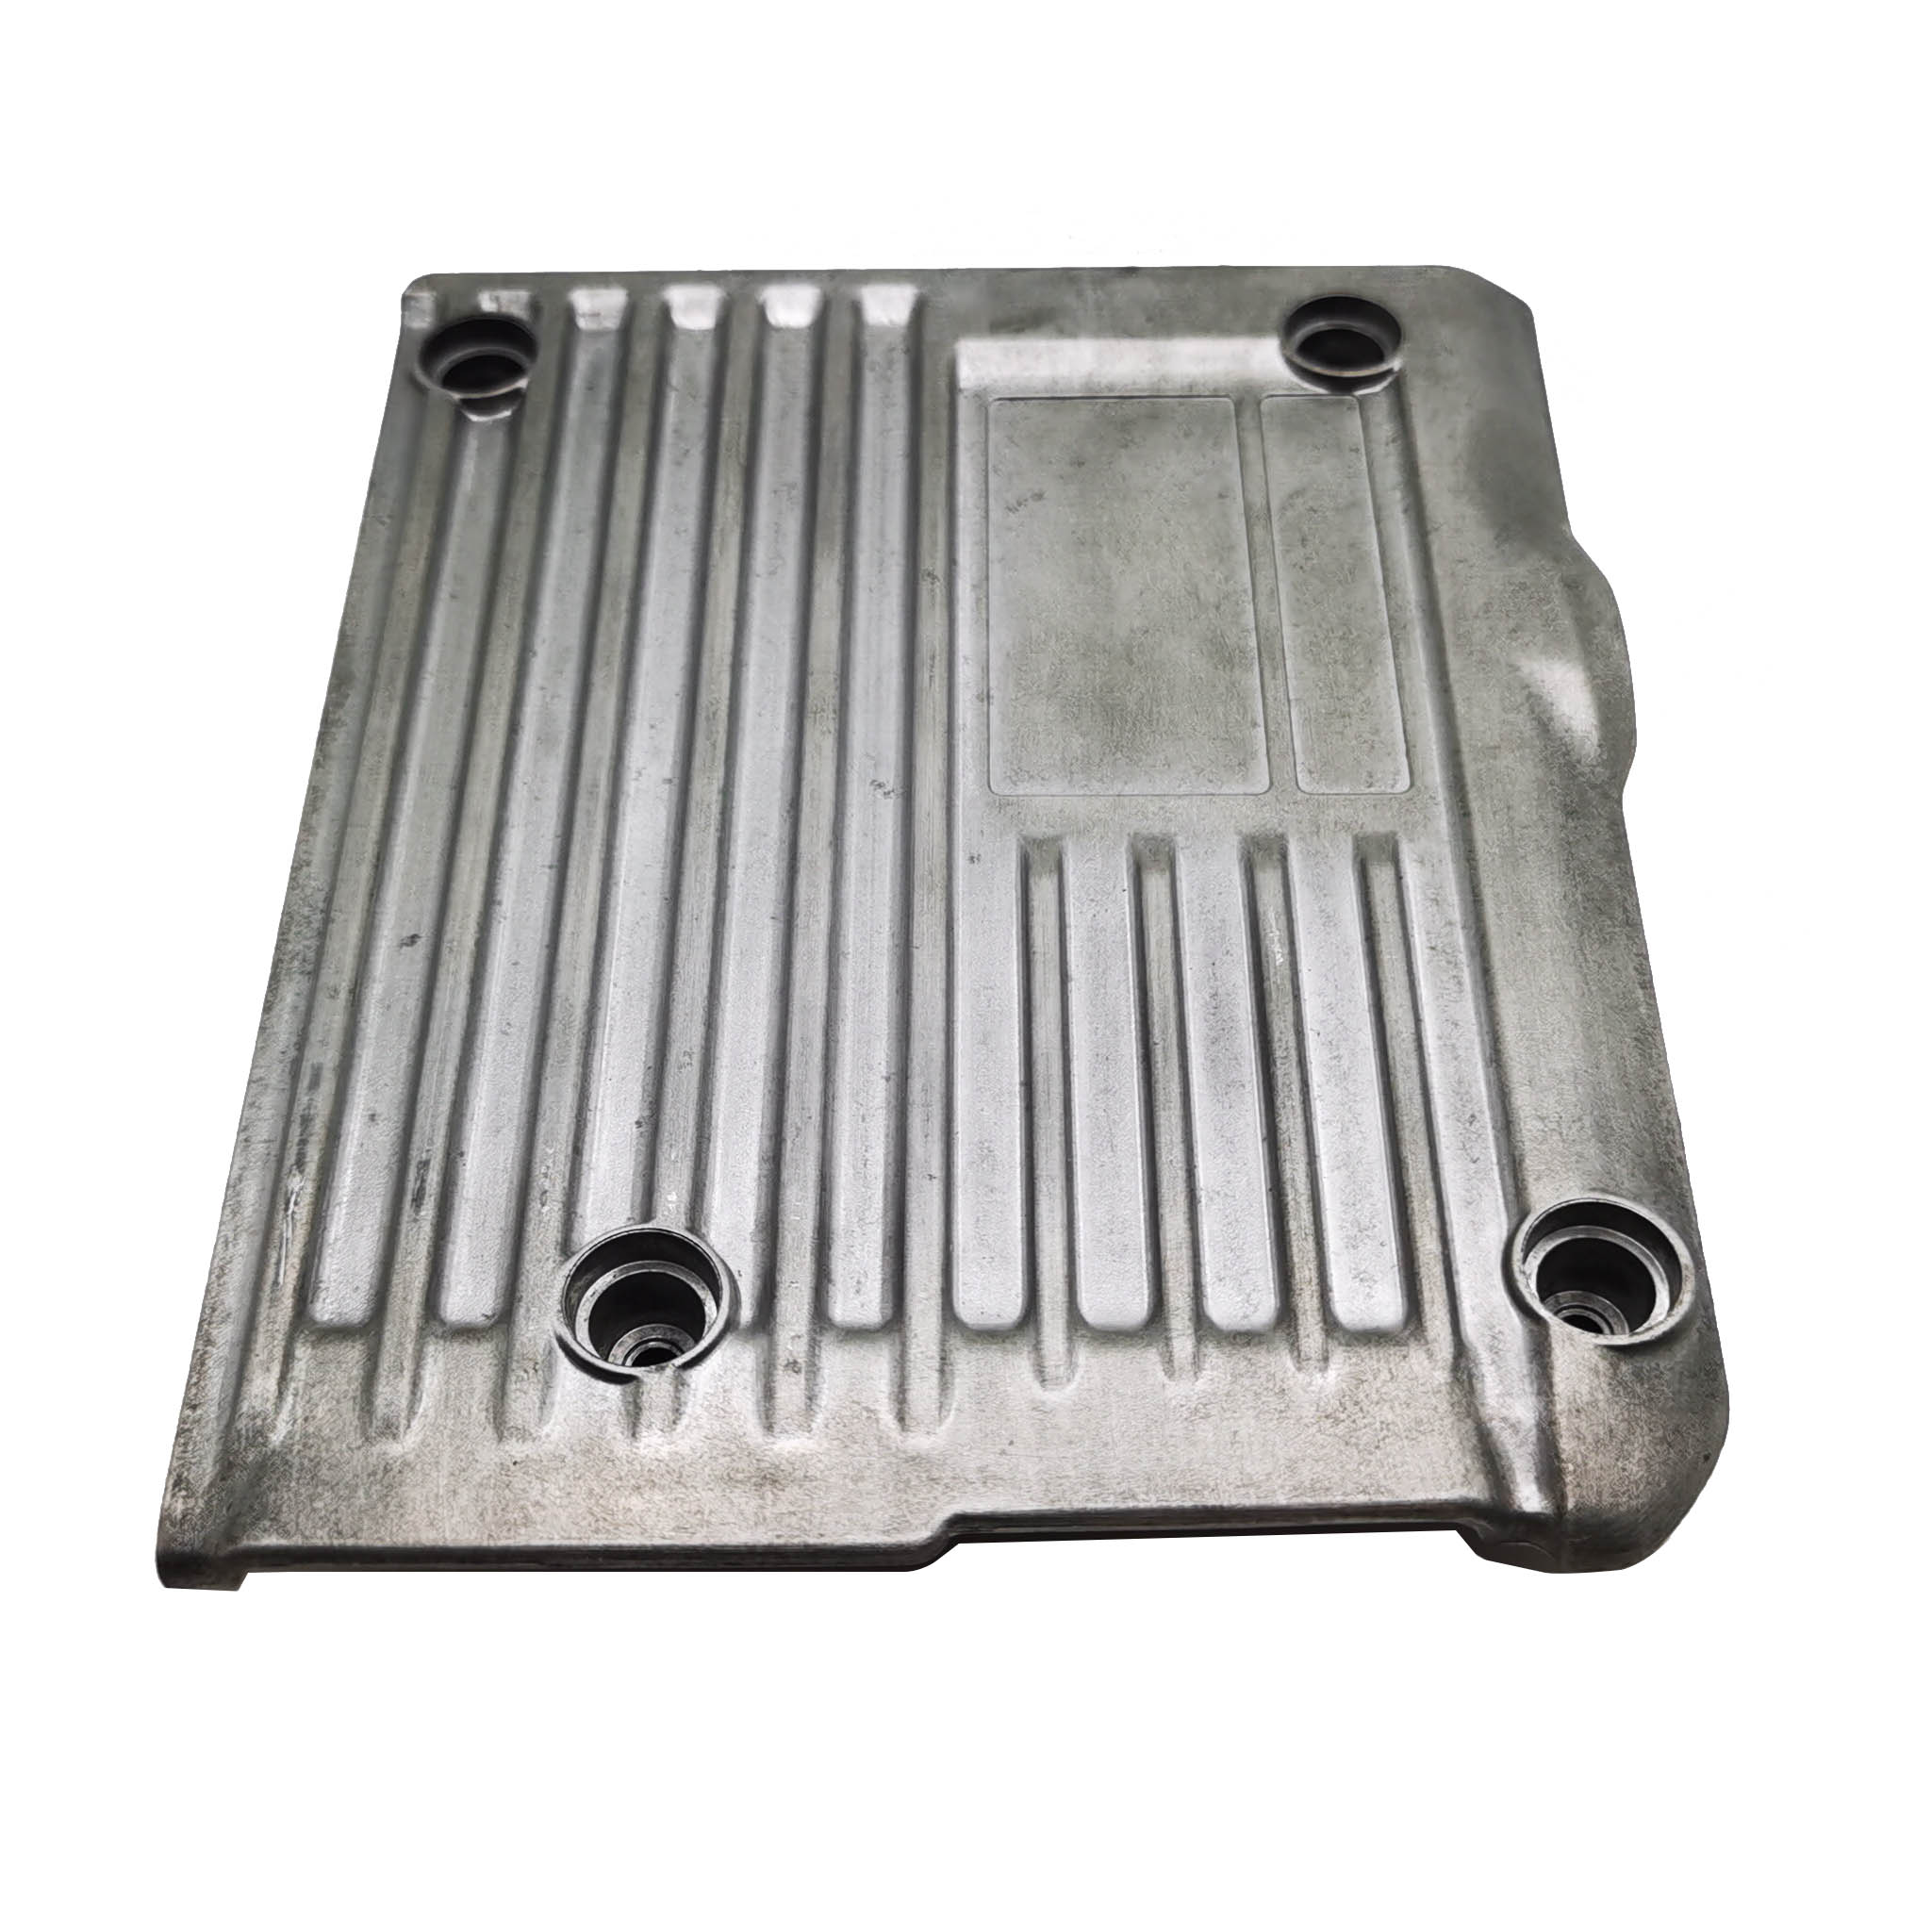 Customized high quality aluminum alloy die casting metal component zinc alloy customized product